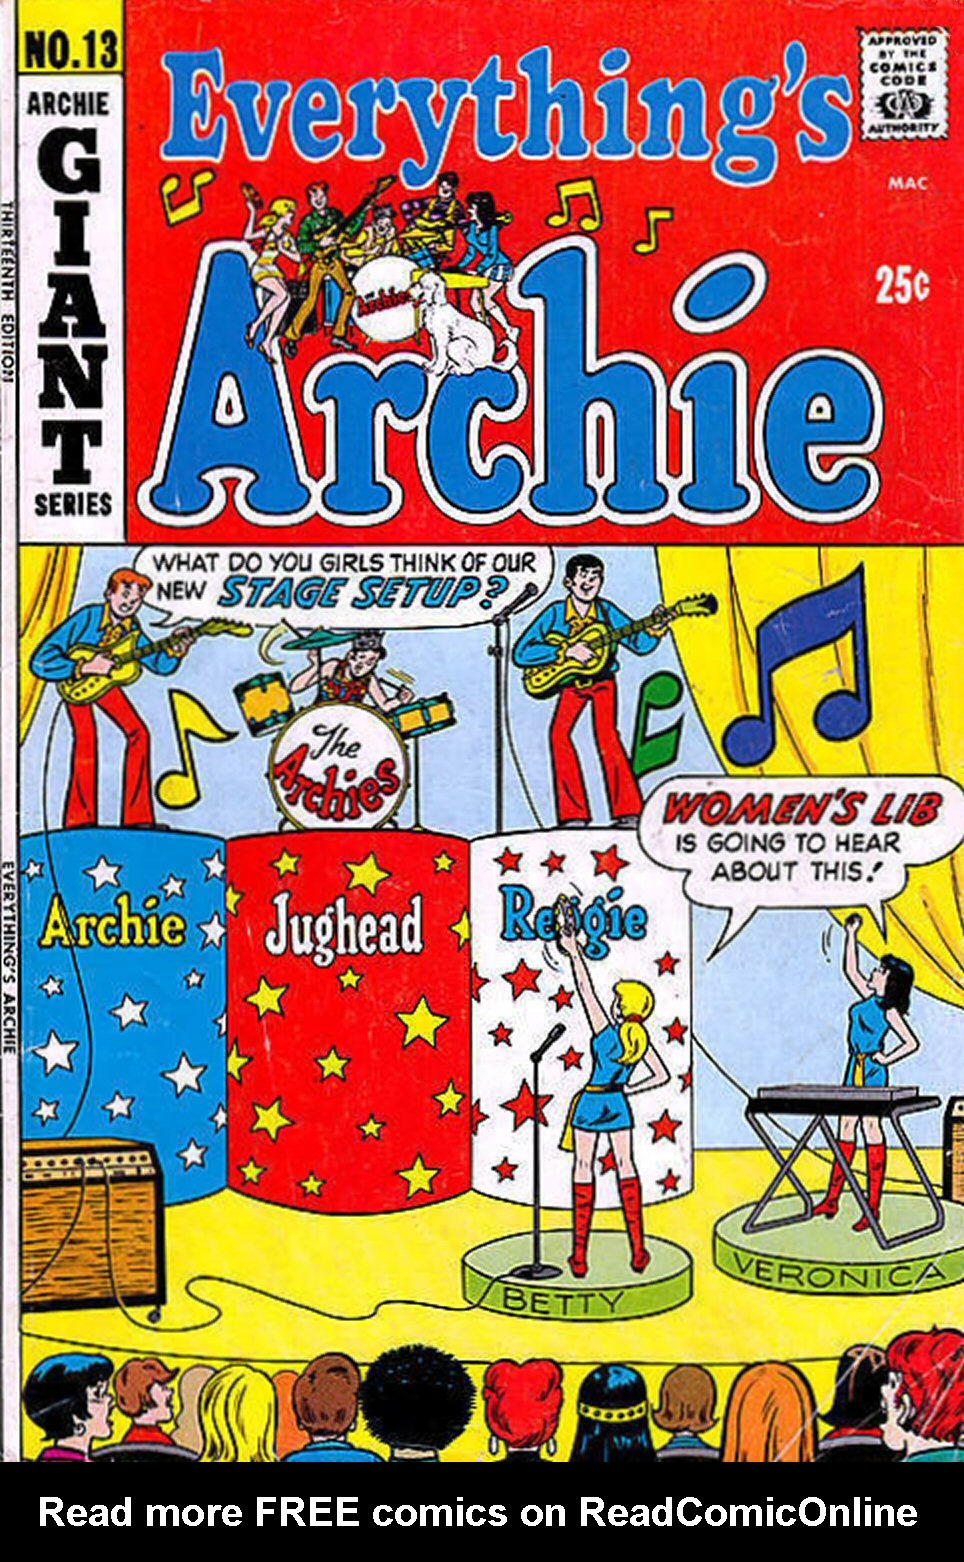 Read online Everything's Archie comic -  Issue #13 - 1